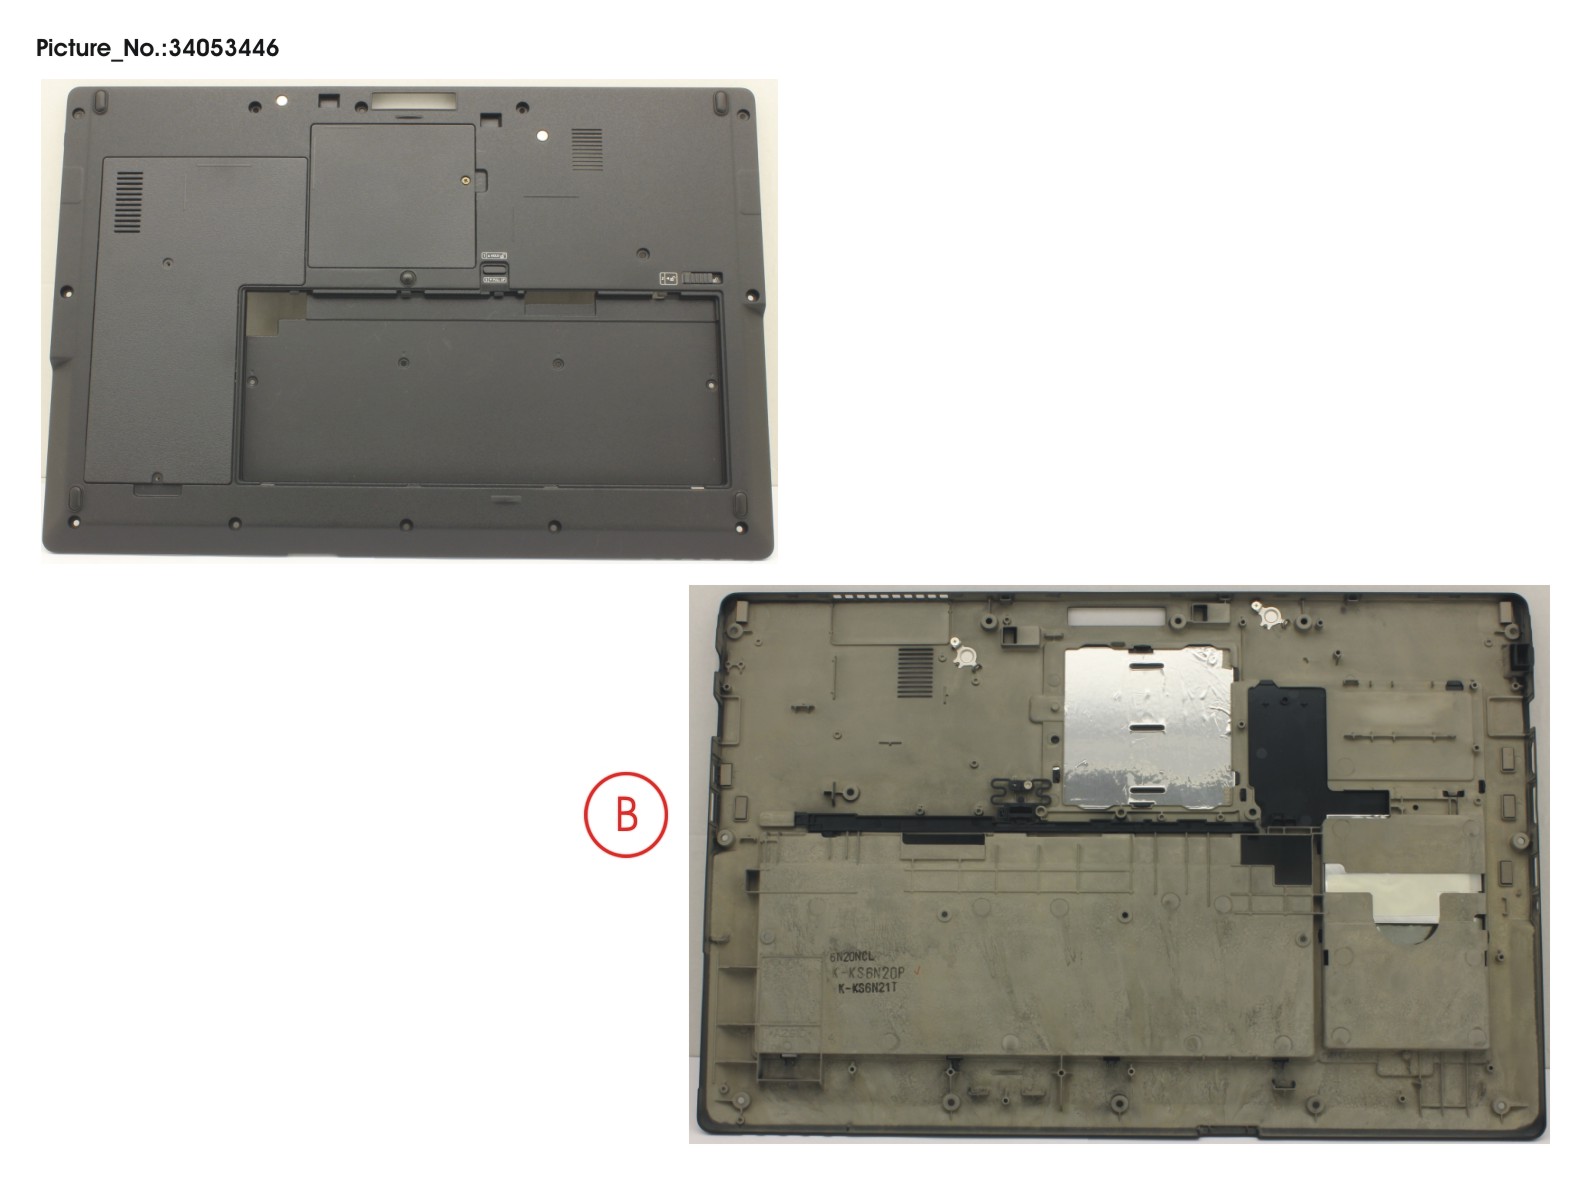 LOWER ASSY (FOR SSD M.2)